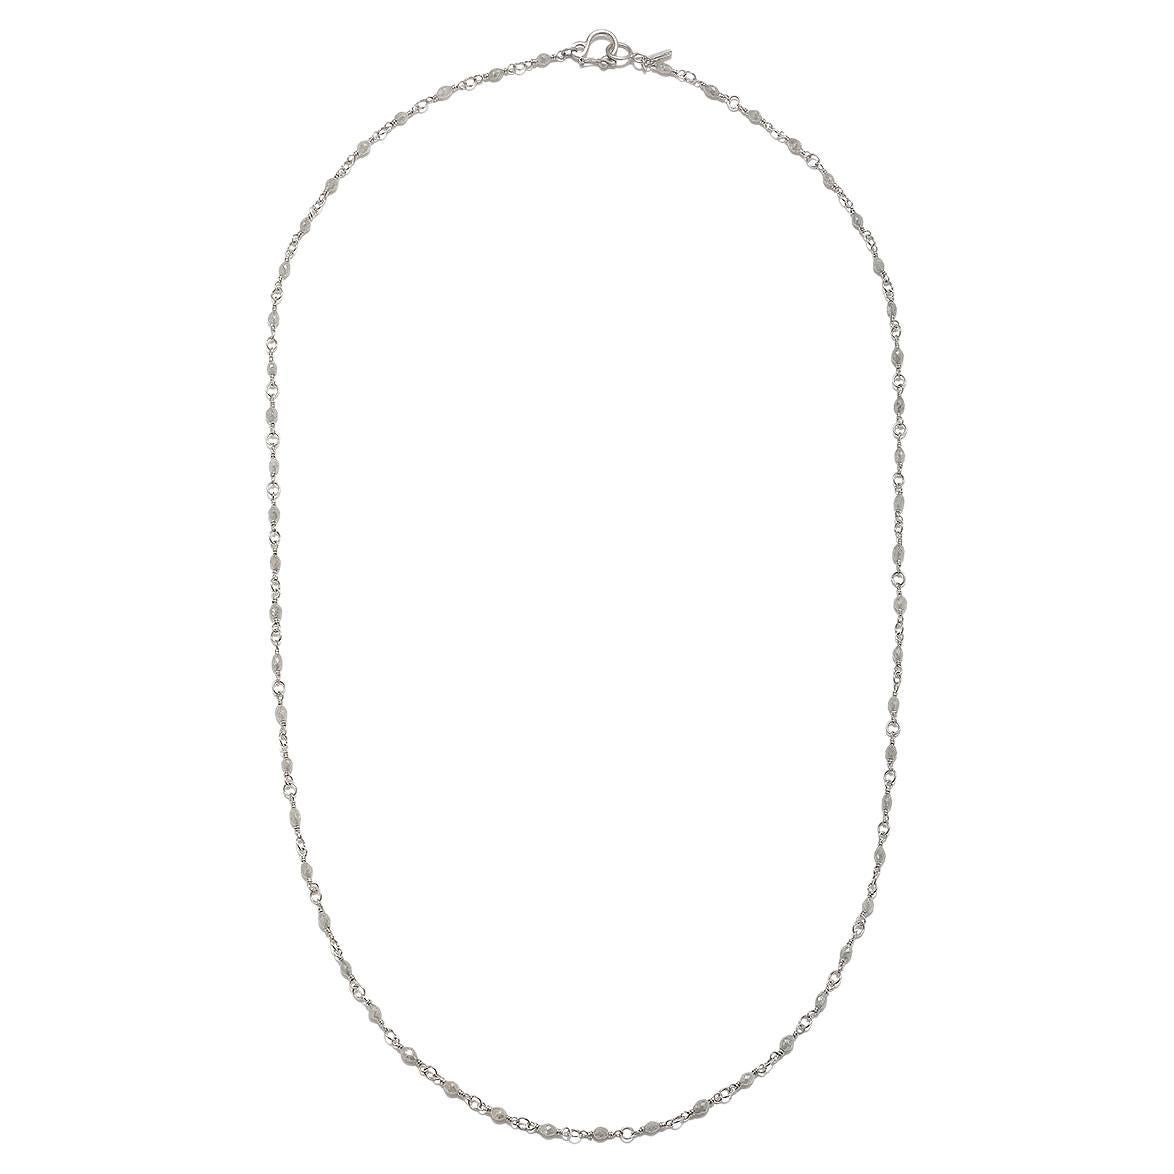 Faye Kim Platinum Handwrapped Bead Necklace -23" For Sale